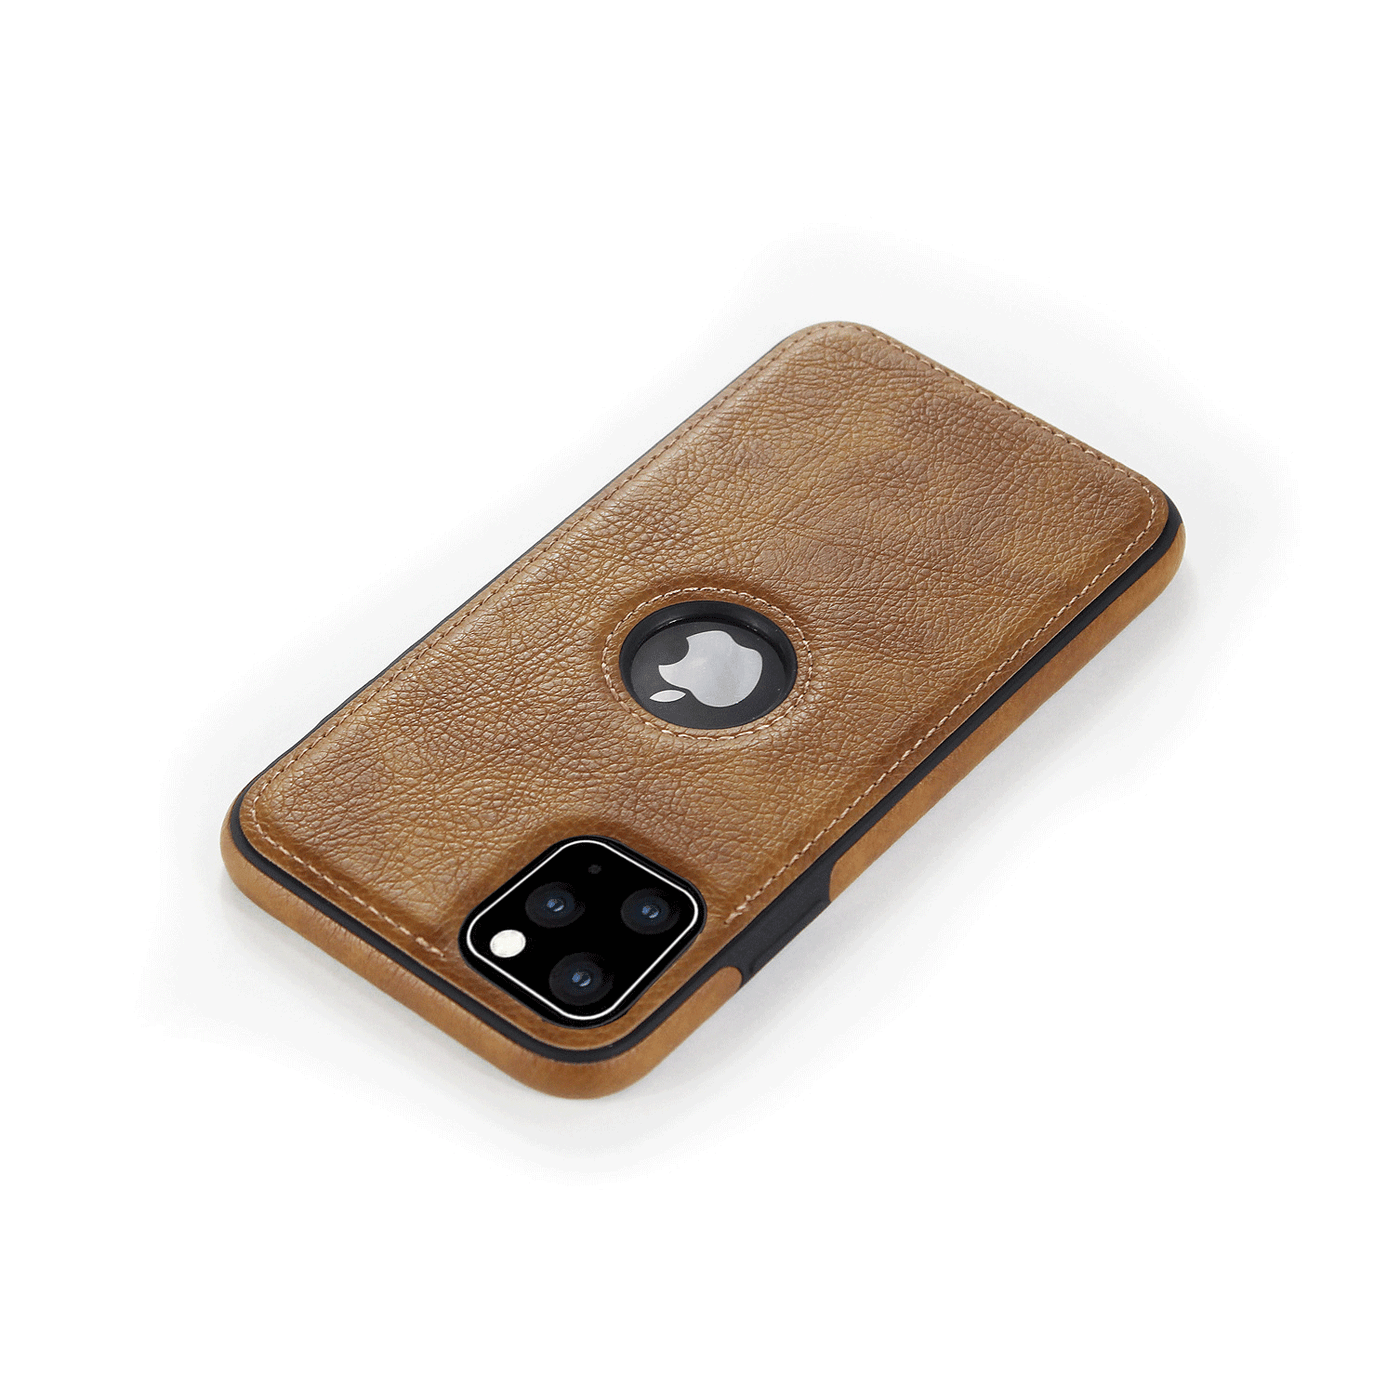 Excelsior Premium PU Leather Back Cover case For Apple iPhone 11 Pro Max